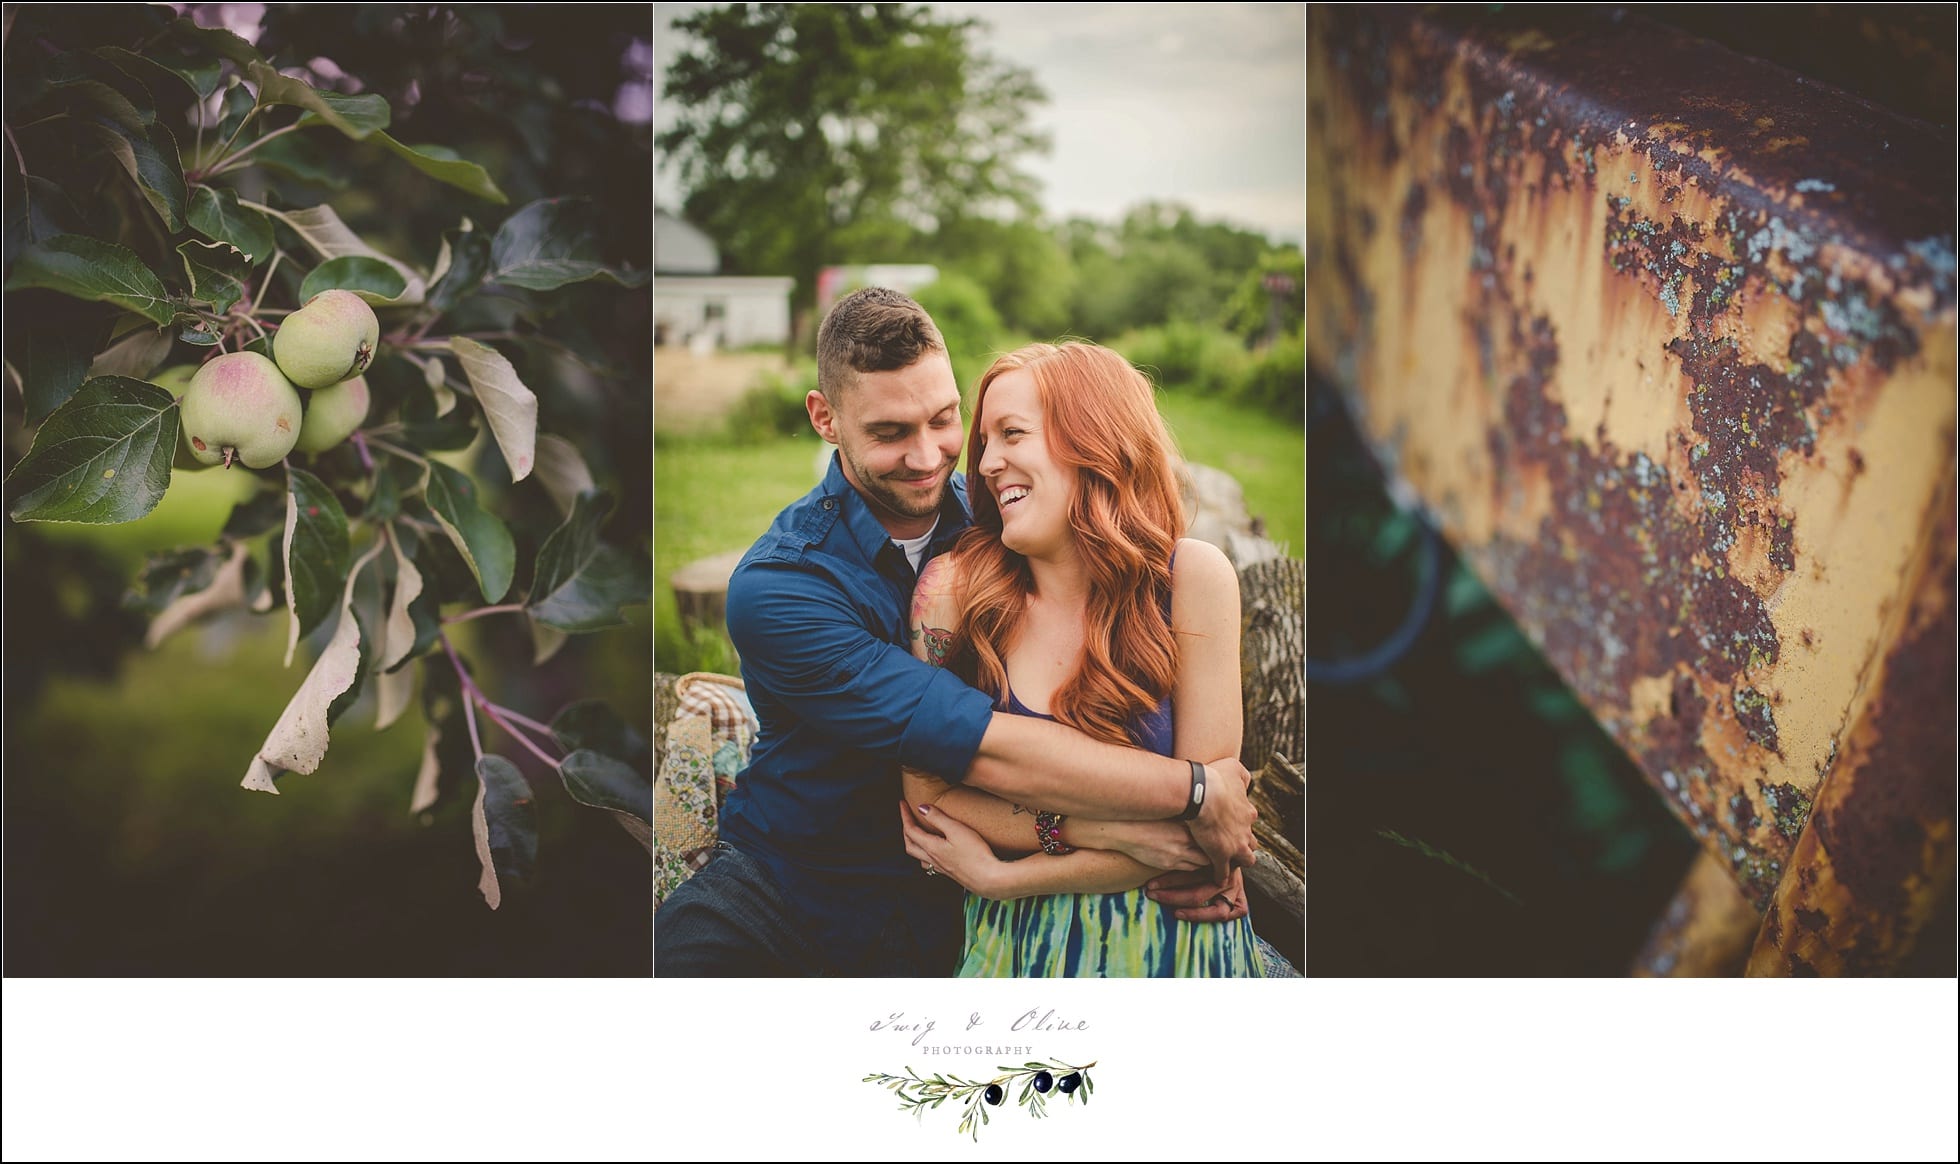 happy couples, engagement sessions, outdoor, rustic, vintage, awesome couples, Twig and Olive, engagement sessions, Sun Prairie area engagement photography, details, its the little things, Dane county couples